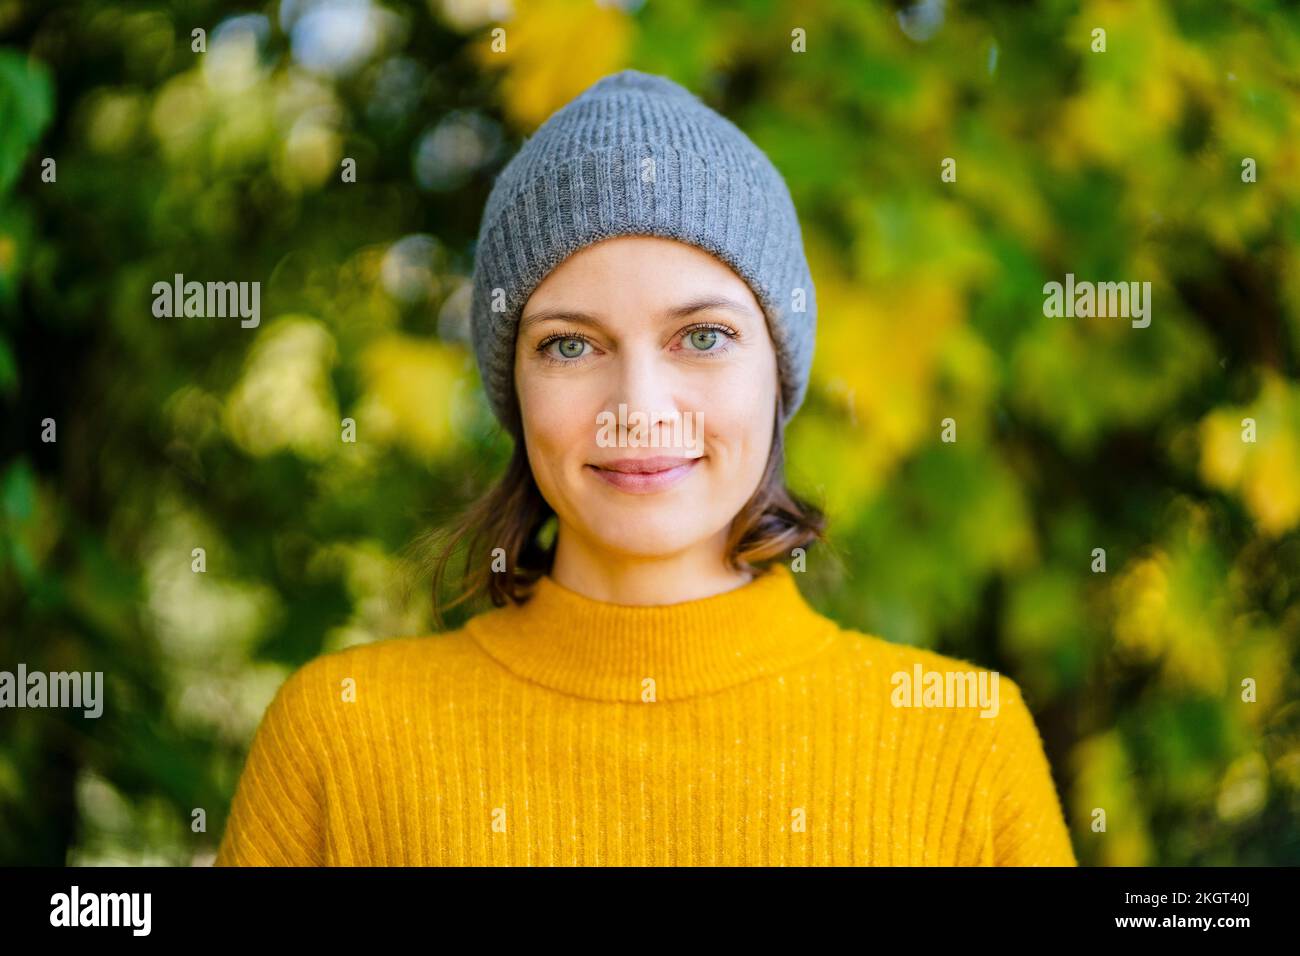 Smiling woman standing with knit hat Stock Photo